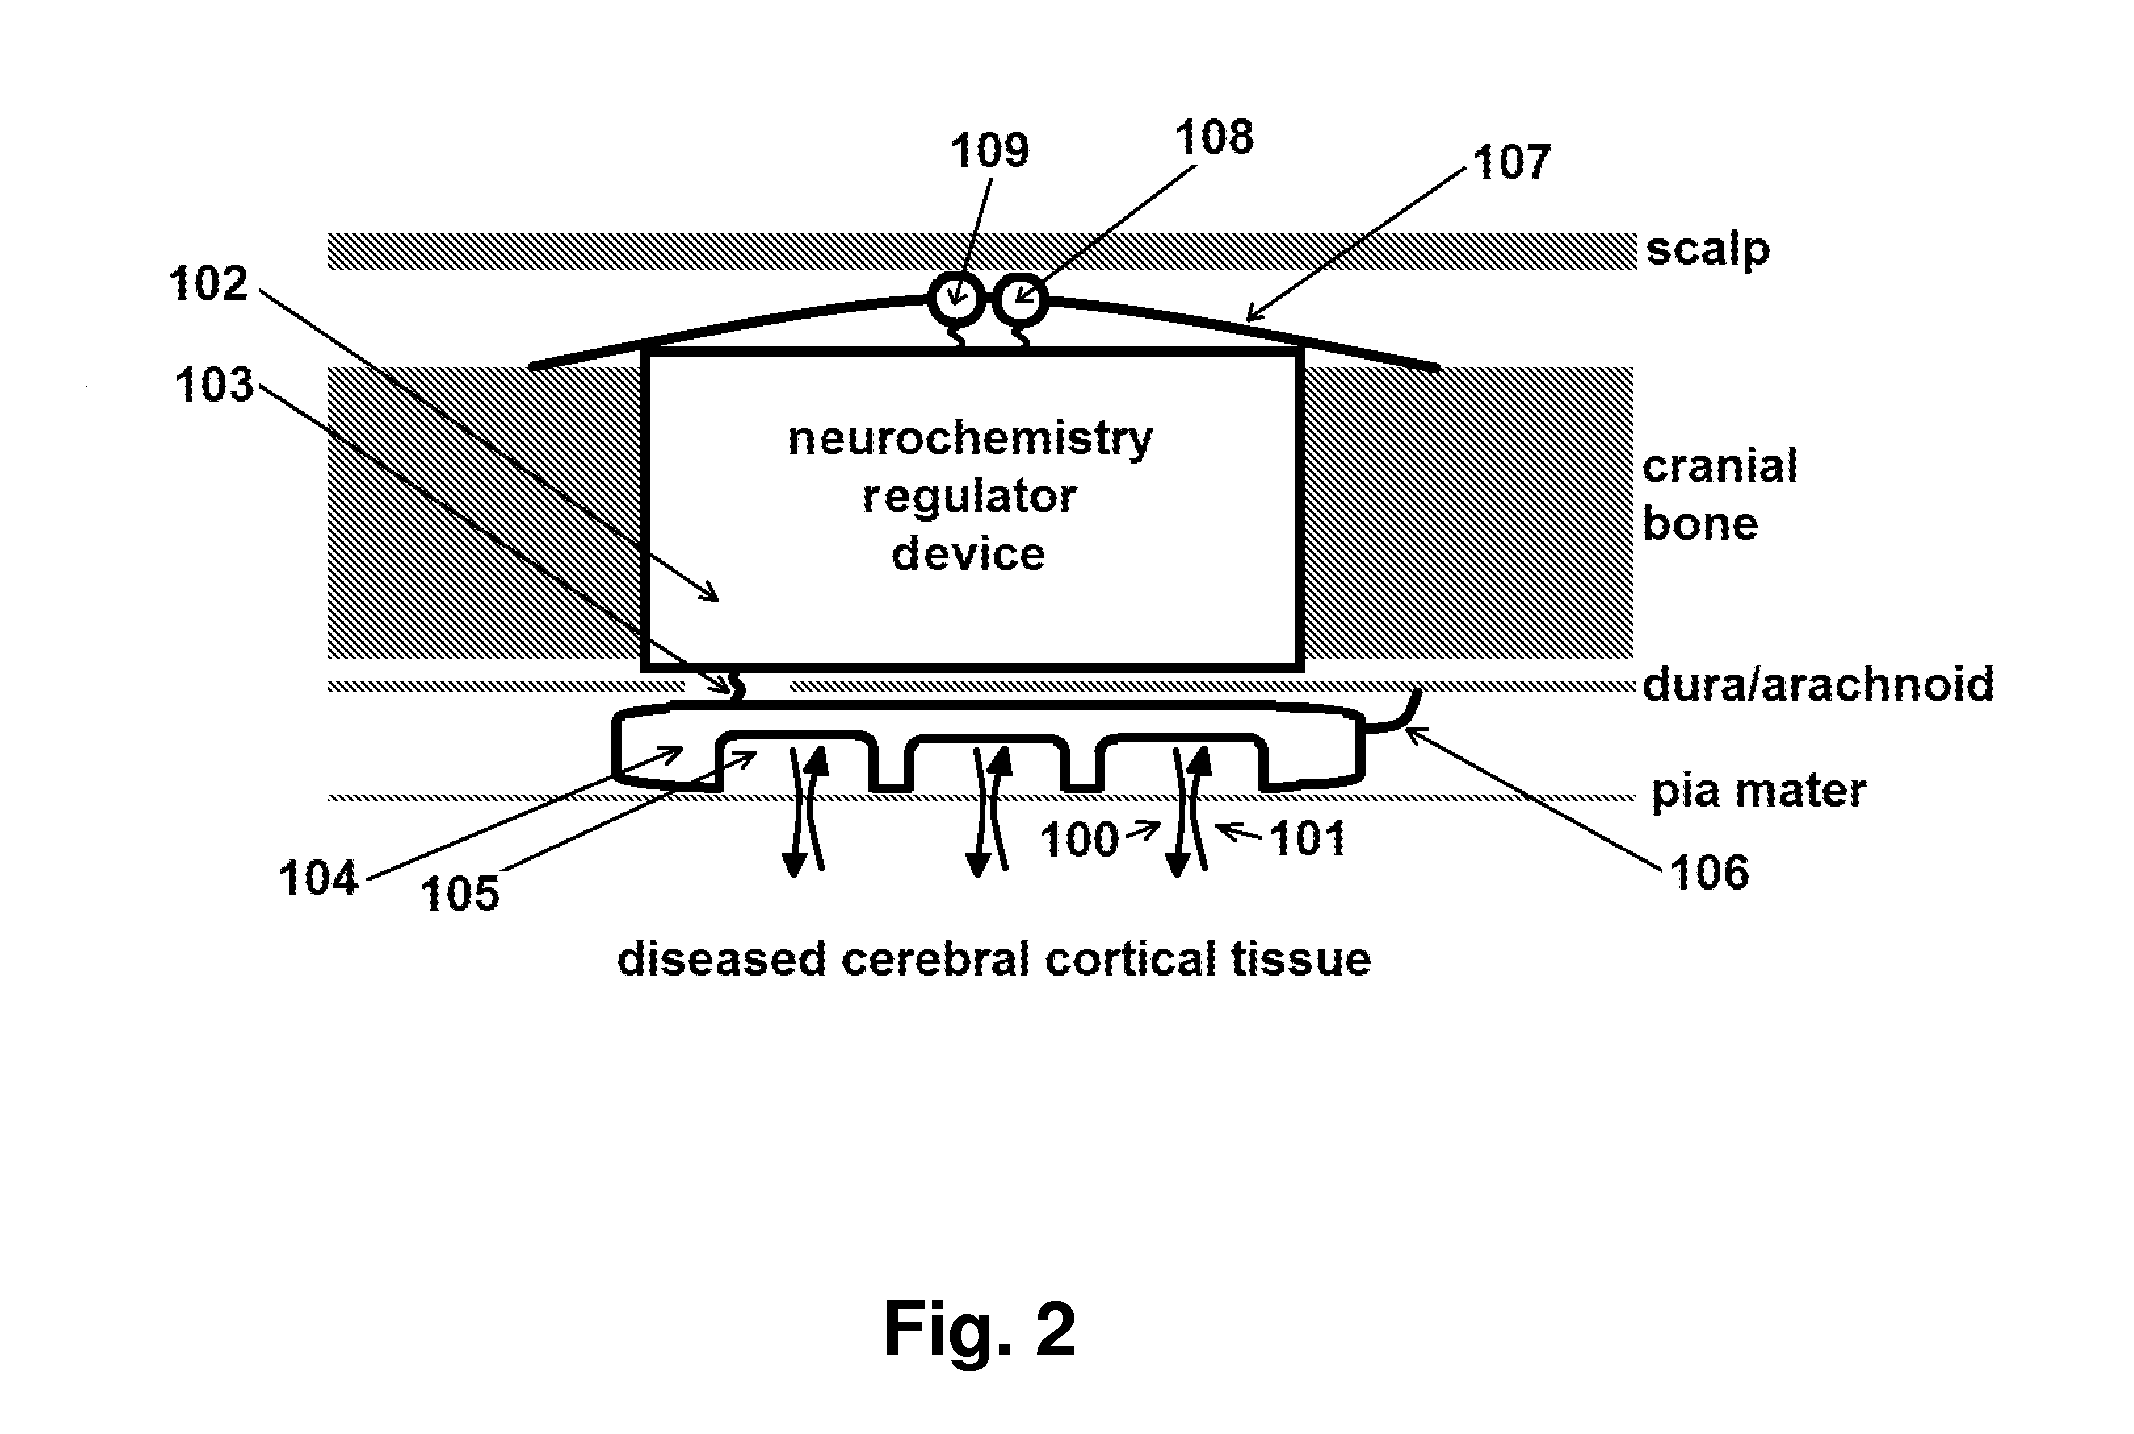 Apparatus and use of a neurochemisrty regulator device insertable in the cranium for the
treatment of cerebral cortical disorders